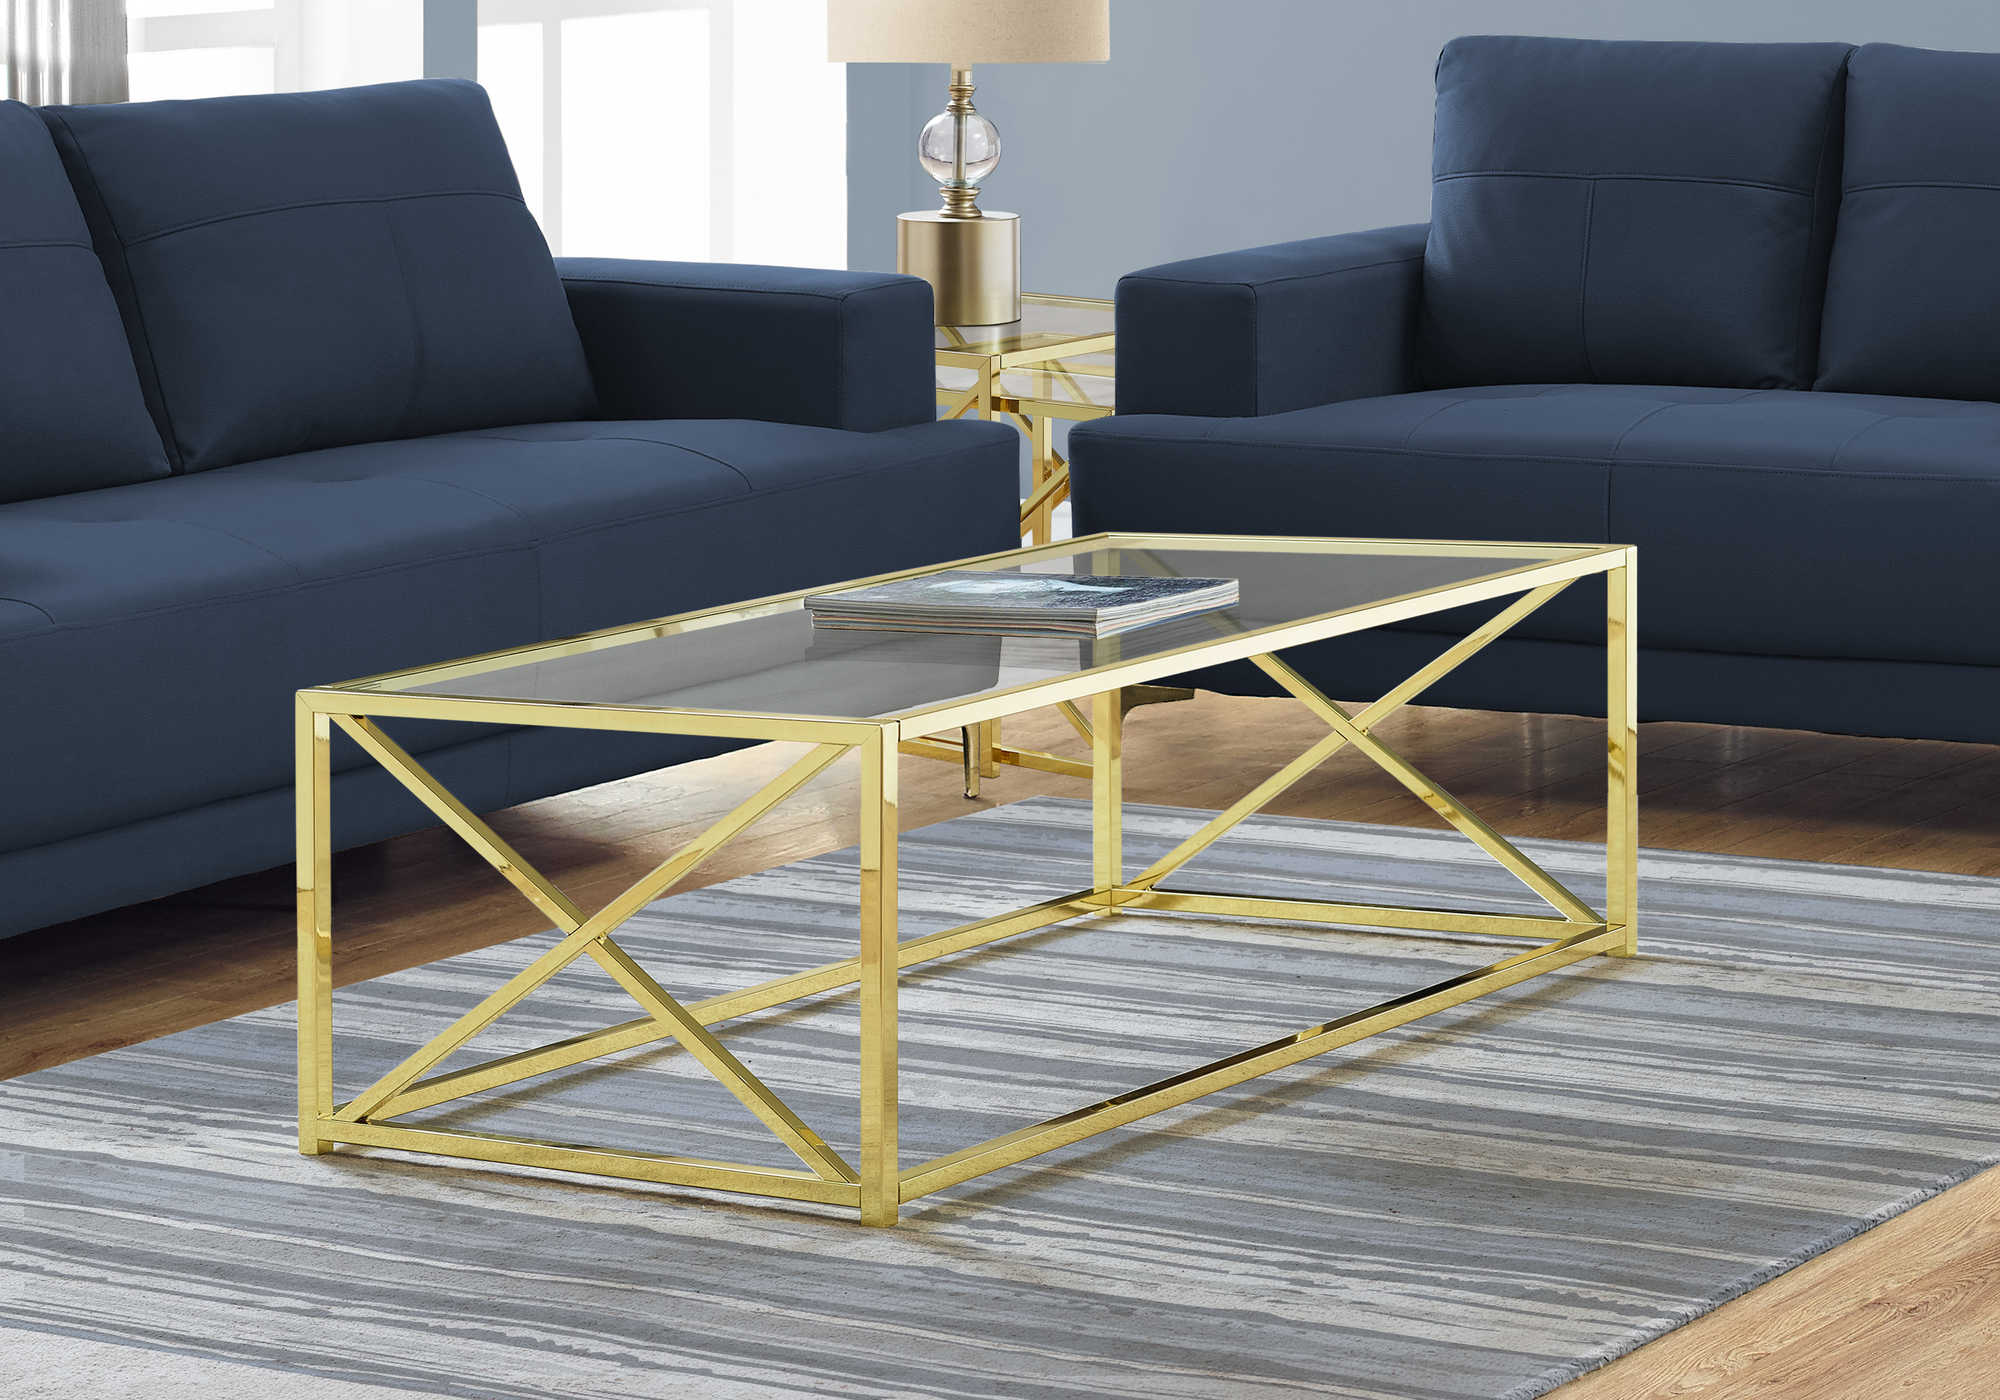 COFFEE TABLE - 44"L / GOLD METAL WITH TEMPERED GLASS